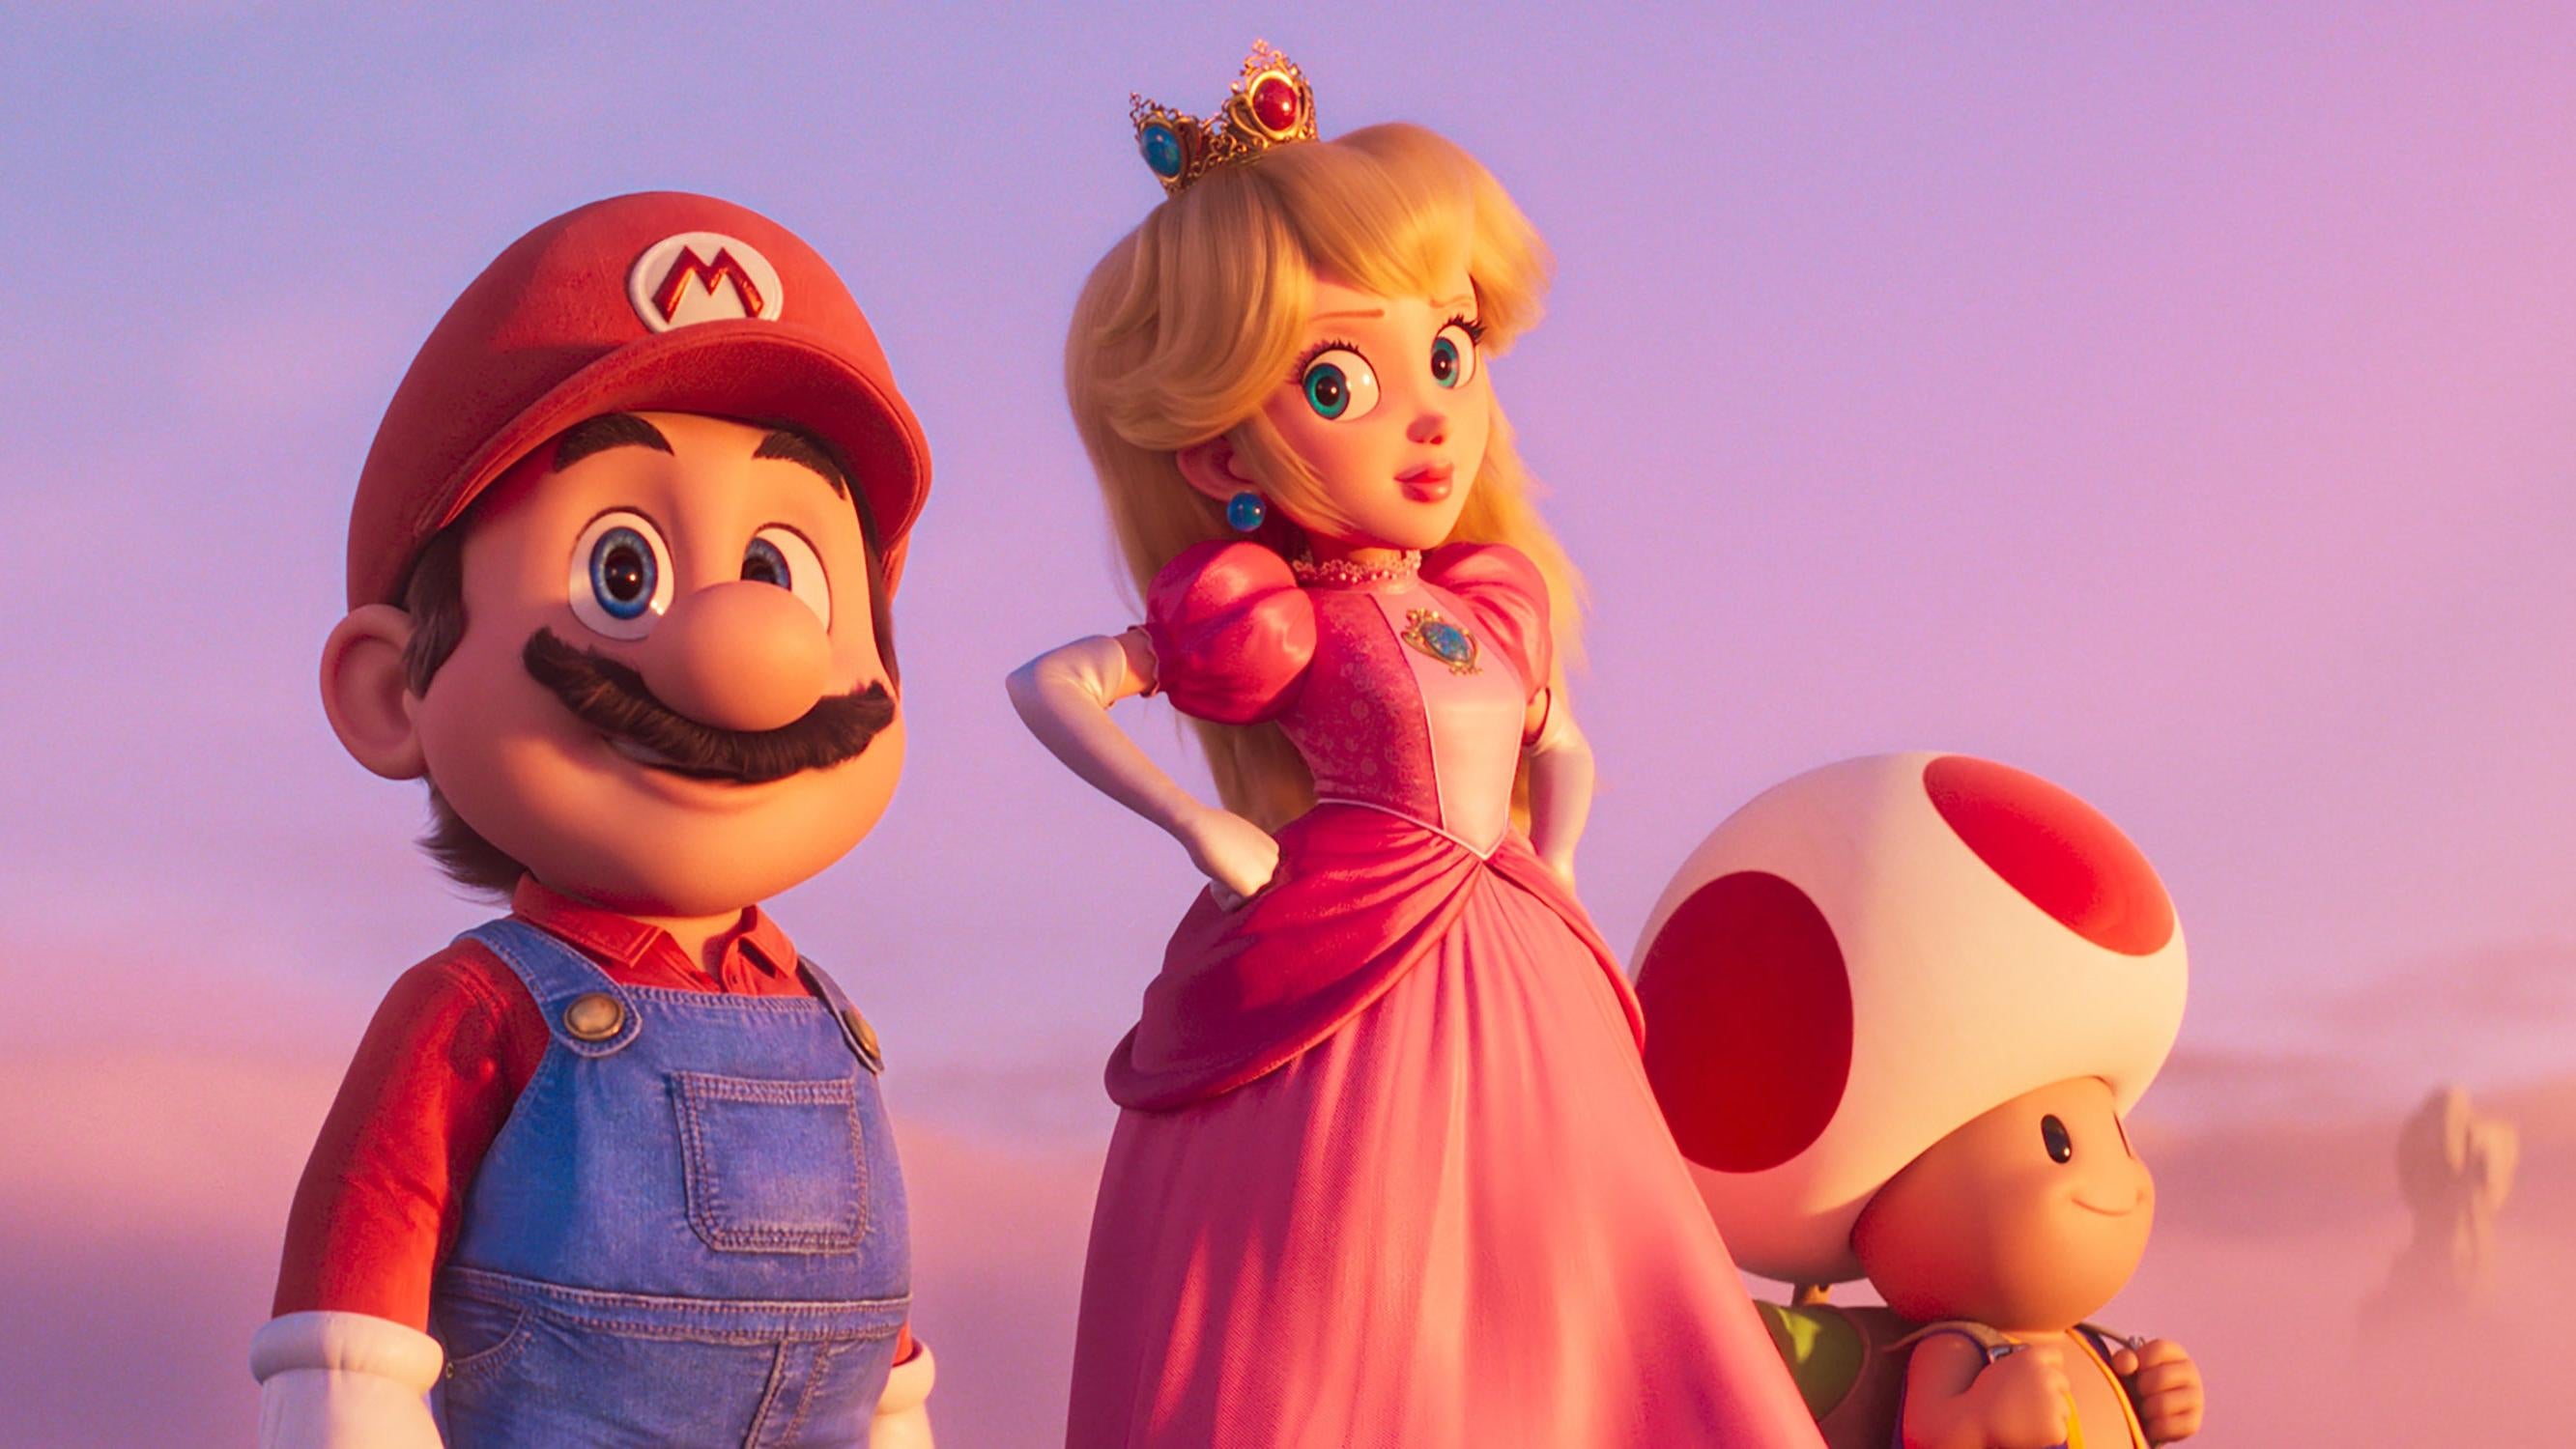 Mario, Peach and Toad. (Image: Universal)